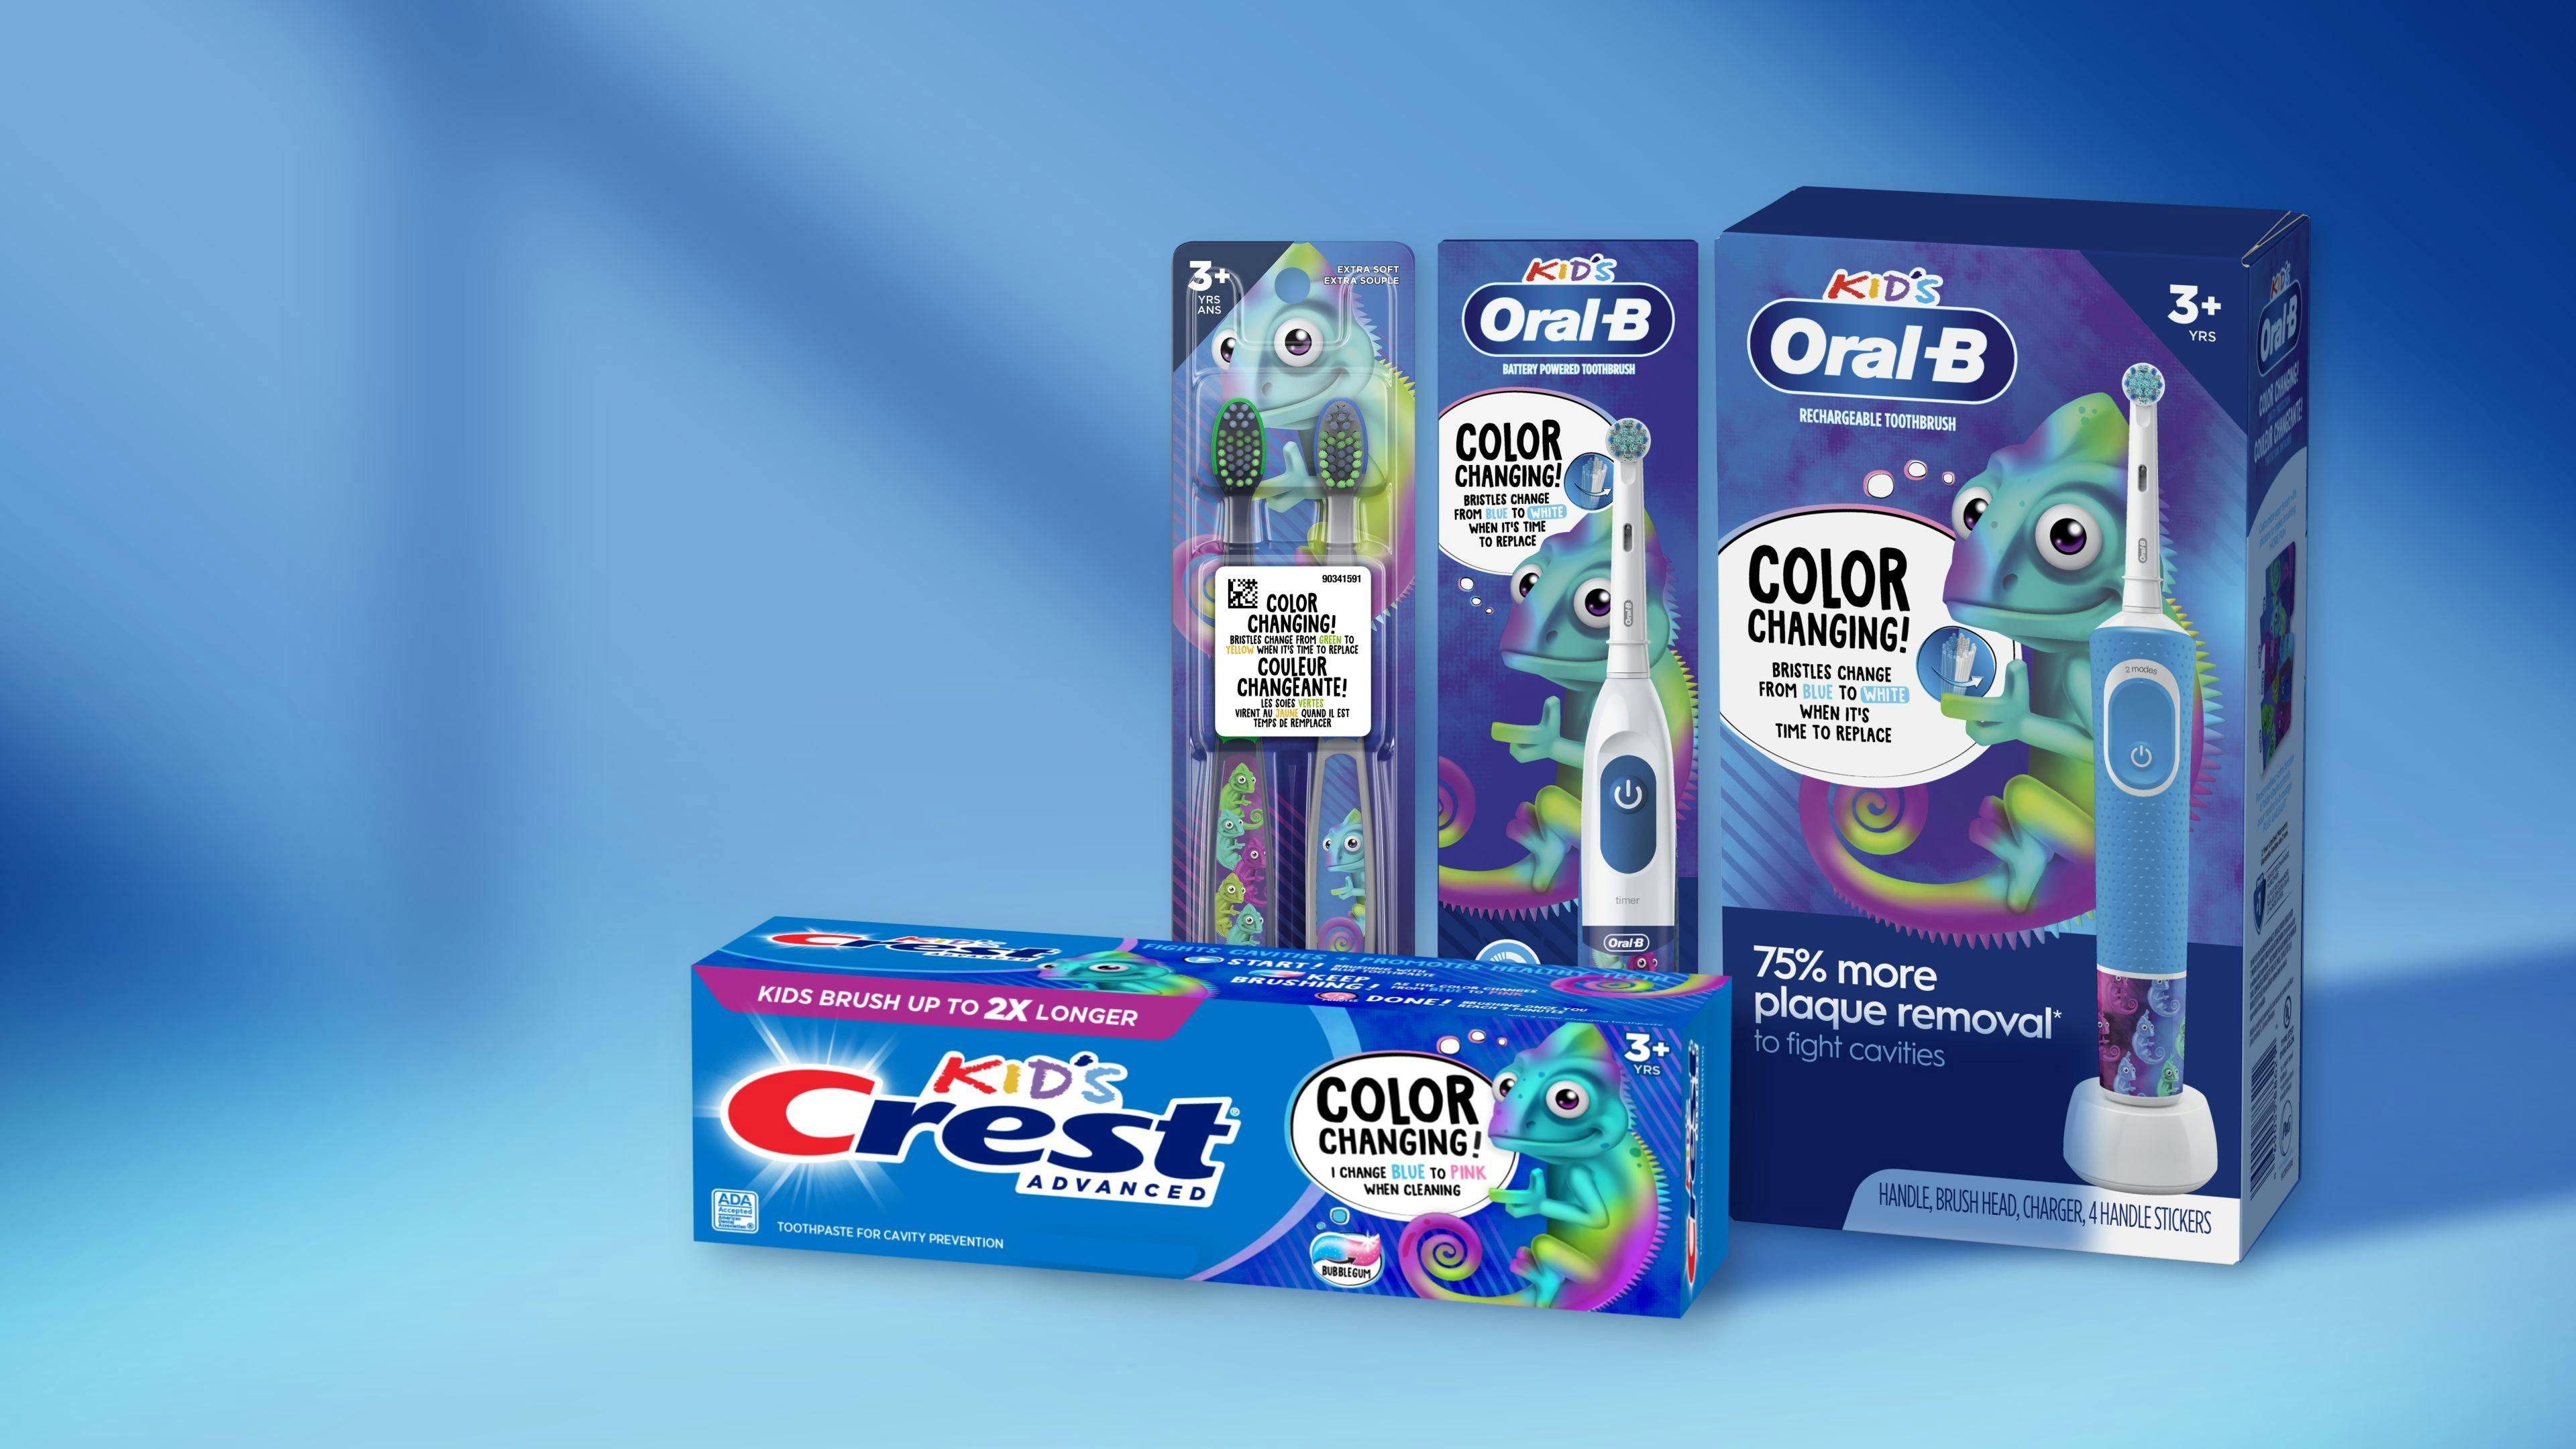 Crest Kids Color Changing Toothpaste | Image Credit: Proctor & Gamble